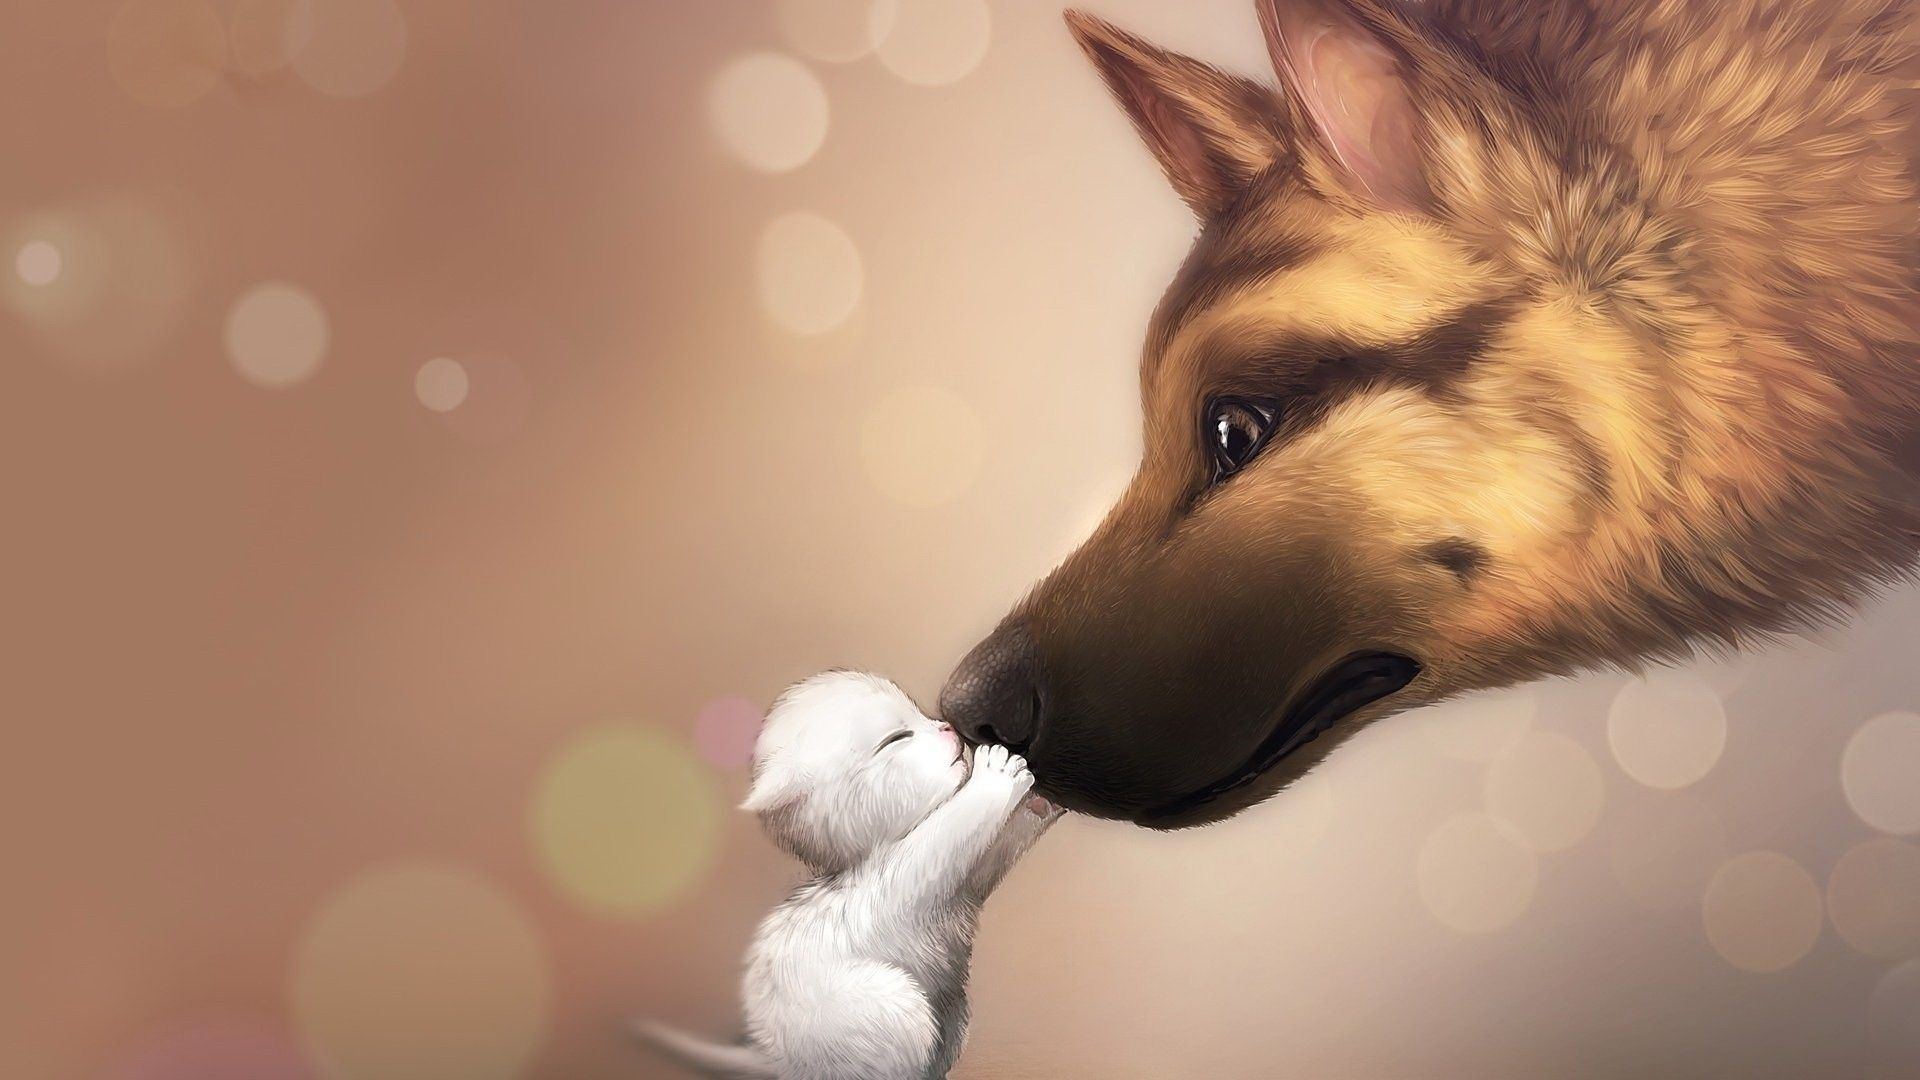 Love, Animated, Cute, Dog, Wallpaper, Full, Screen, Animated Animal Wallpaper & Background Download